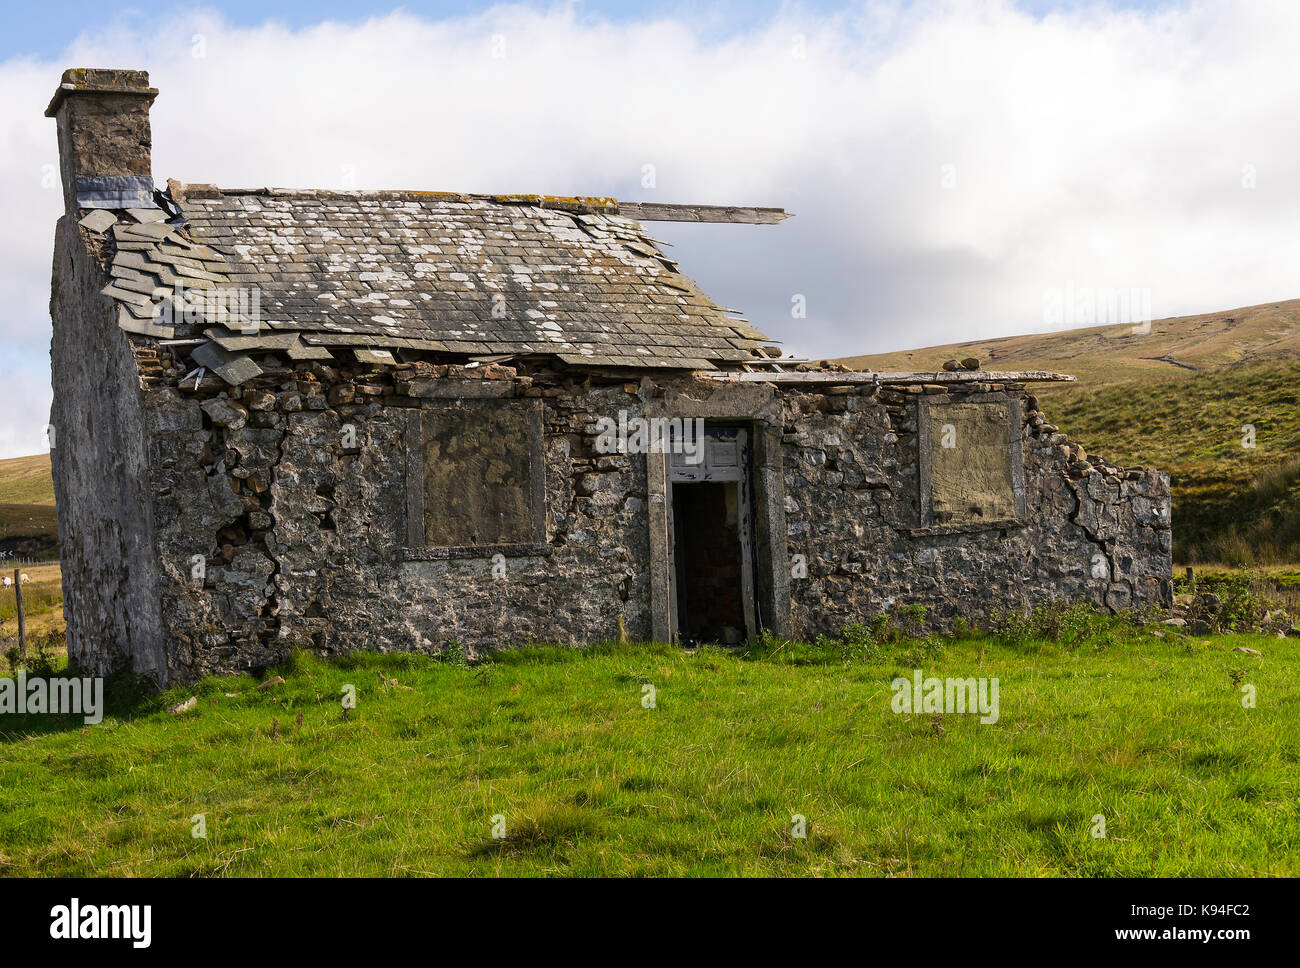 A Dilapidated Cottage near Ribblehead in The Yorkshire Dales National Park Yorkshire England United Kingdom UK Stock Photo